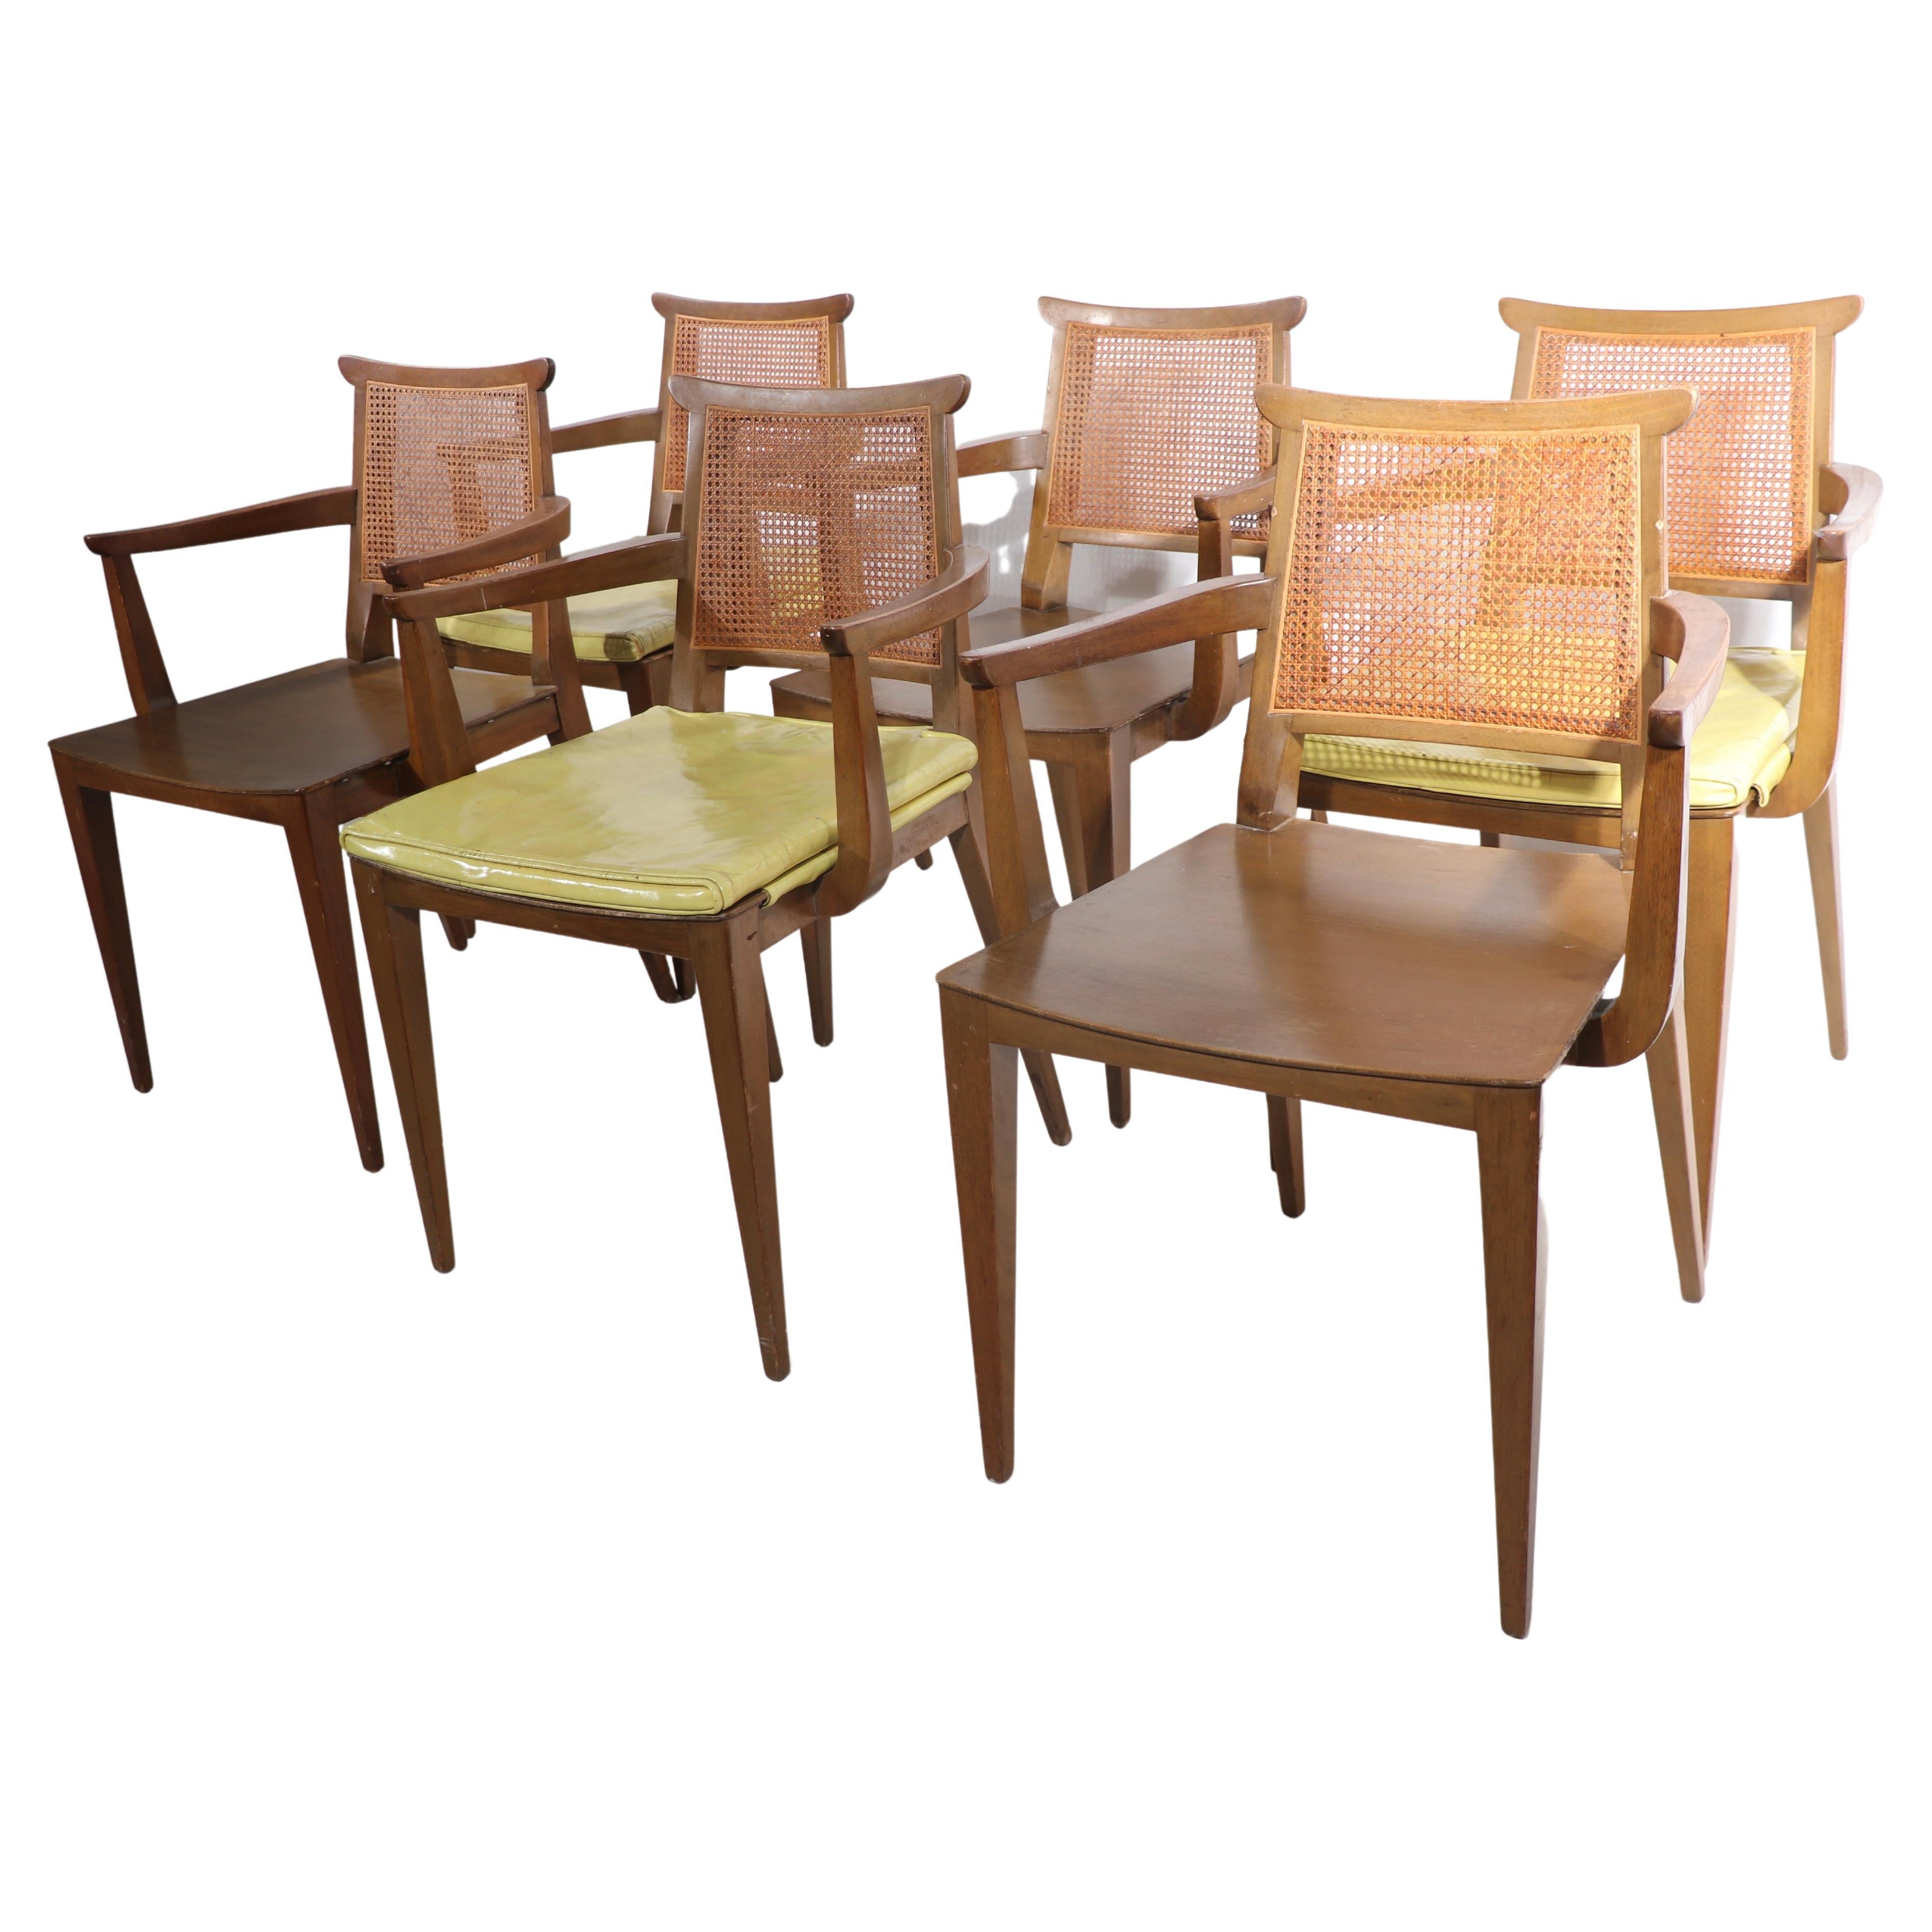 Set of 6 Dunbar Dining Chairs Designed by Wormley, Circa 1950's